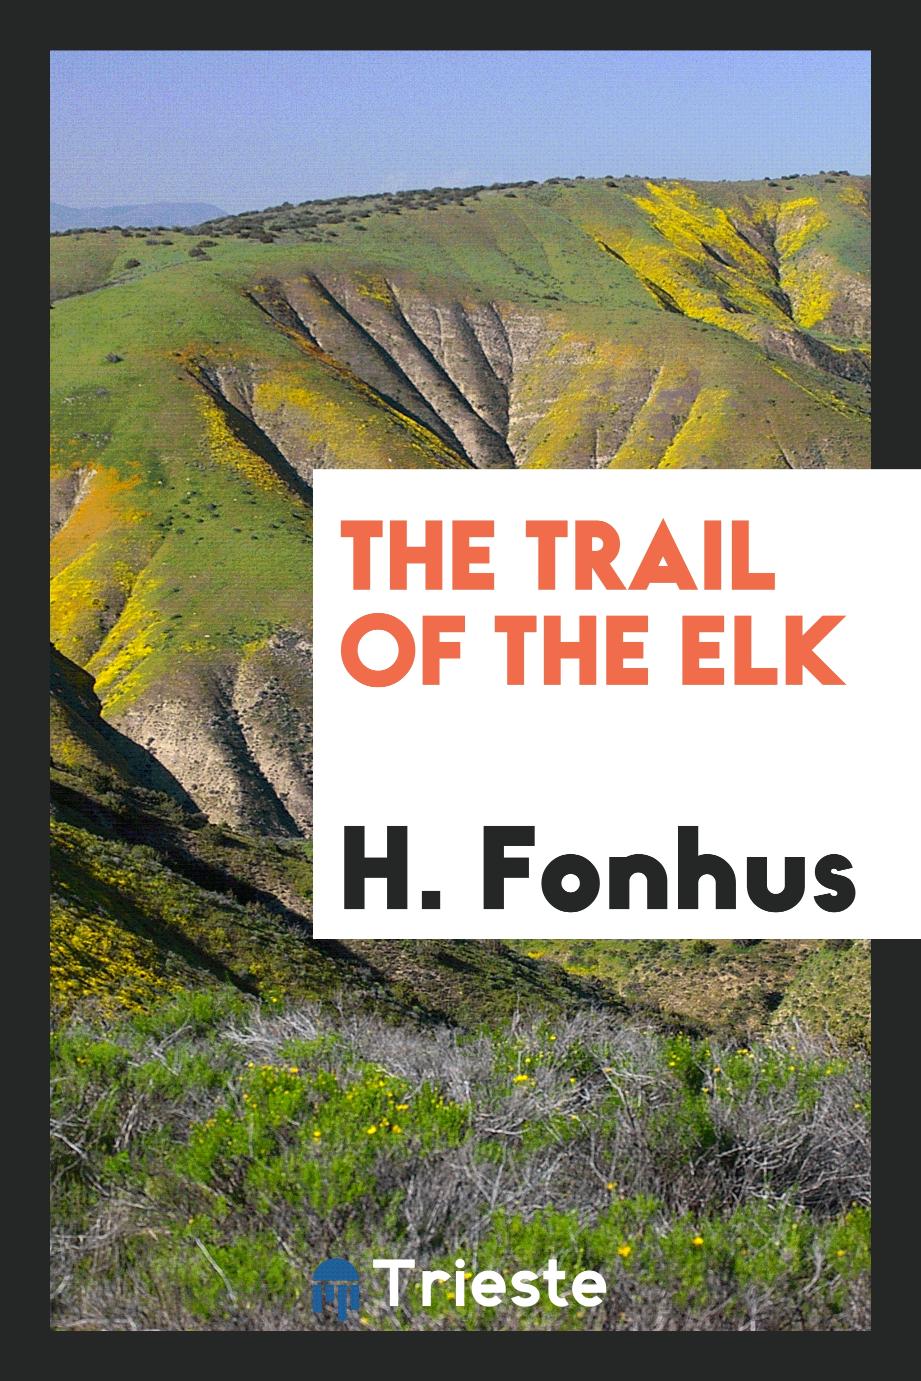 The Trail of the Elk